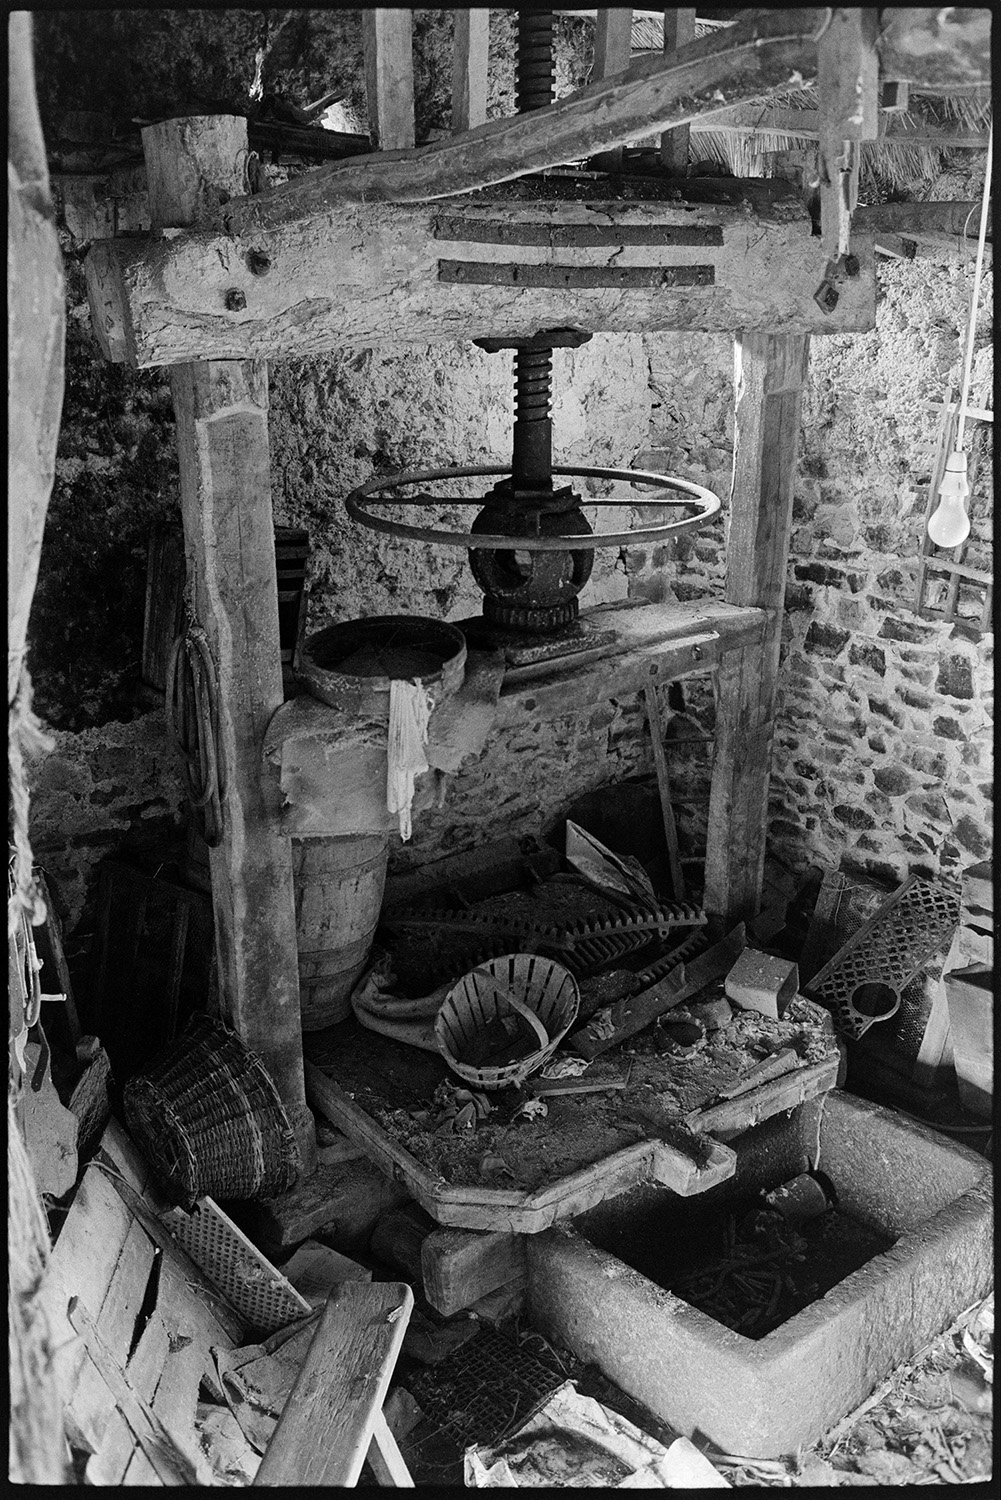 Old cider press, disused.
[An old, disused cider press in a cluttered cob and stone barn at West Chapple Farm, near Winkleigh. Various baskets are littered around the press.]